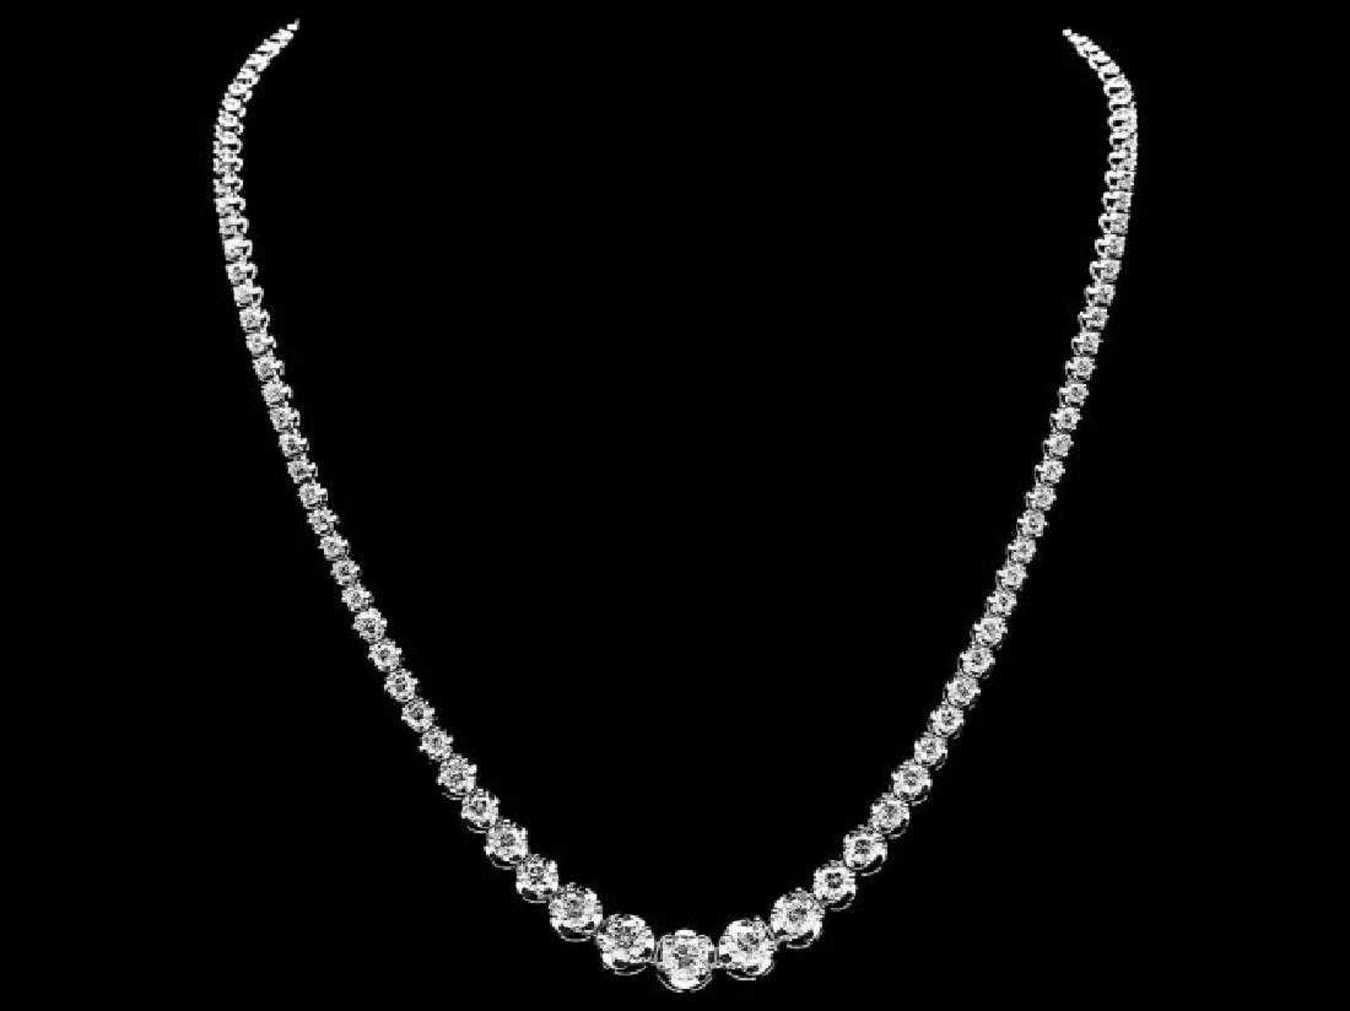 18K White Gold and 10.18ct Diamond Necklace